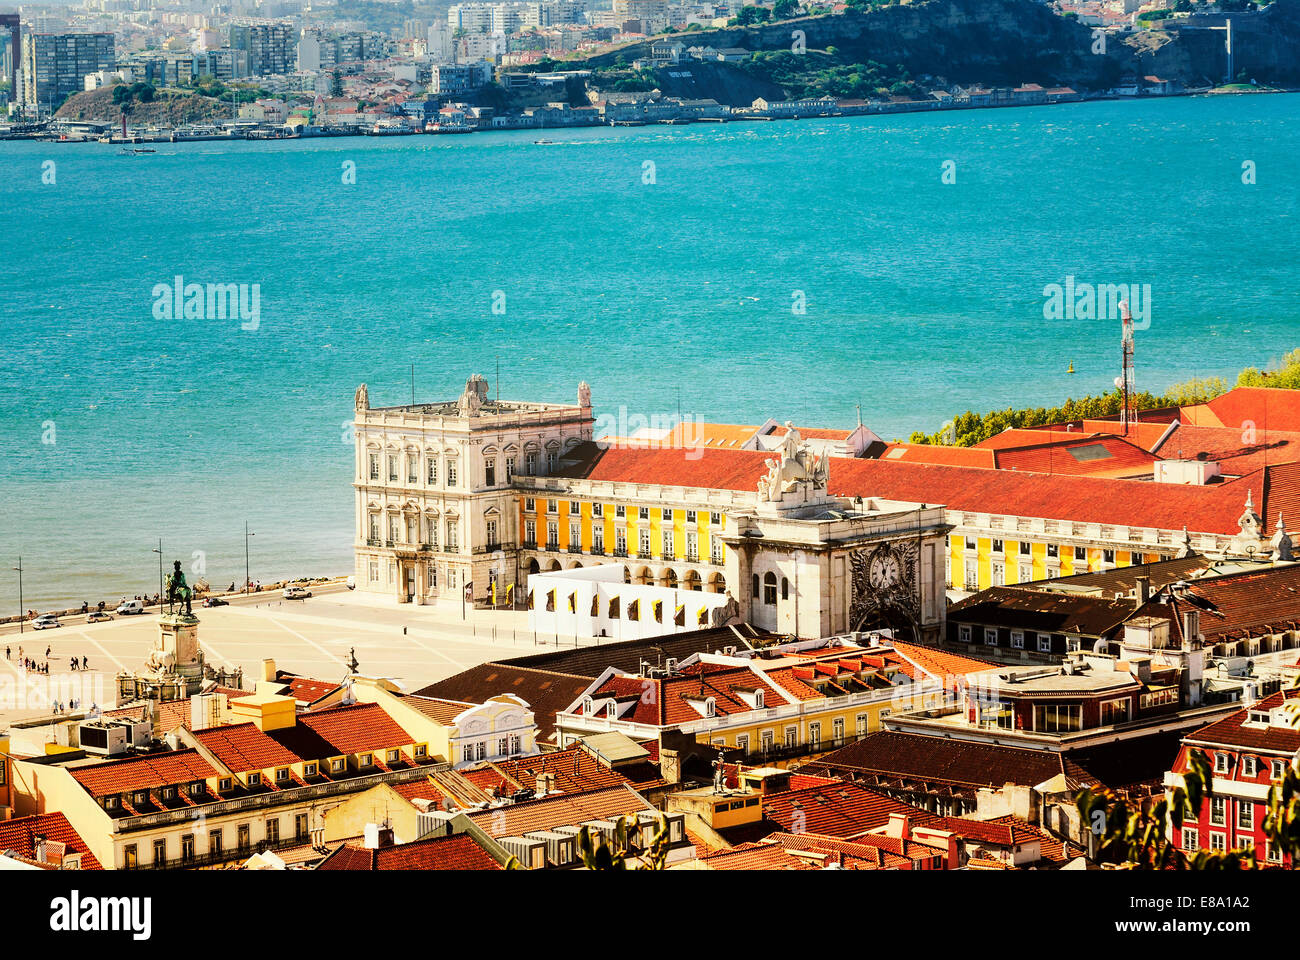 view of commerce place in Lisbon, Baixa district near the famous Tage river Stock Photo